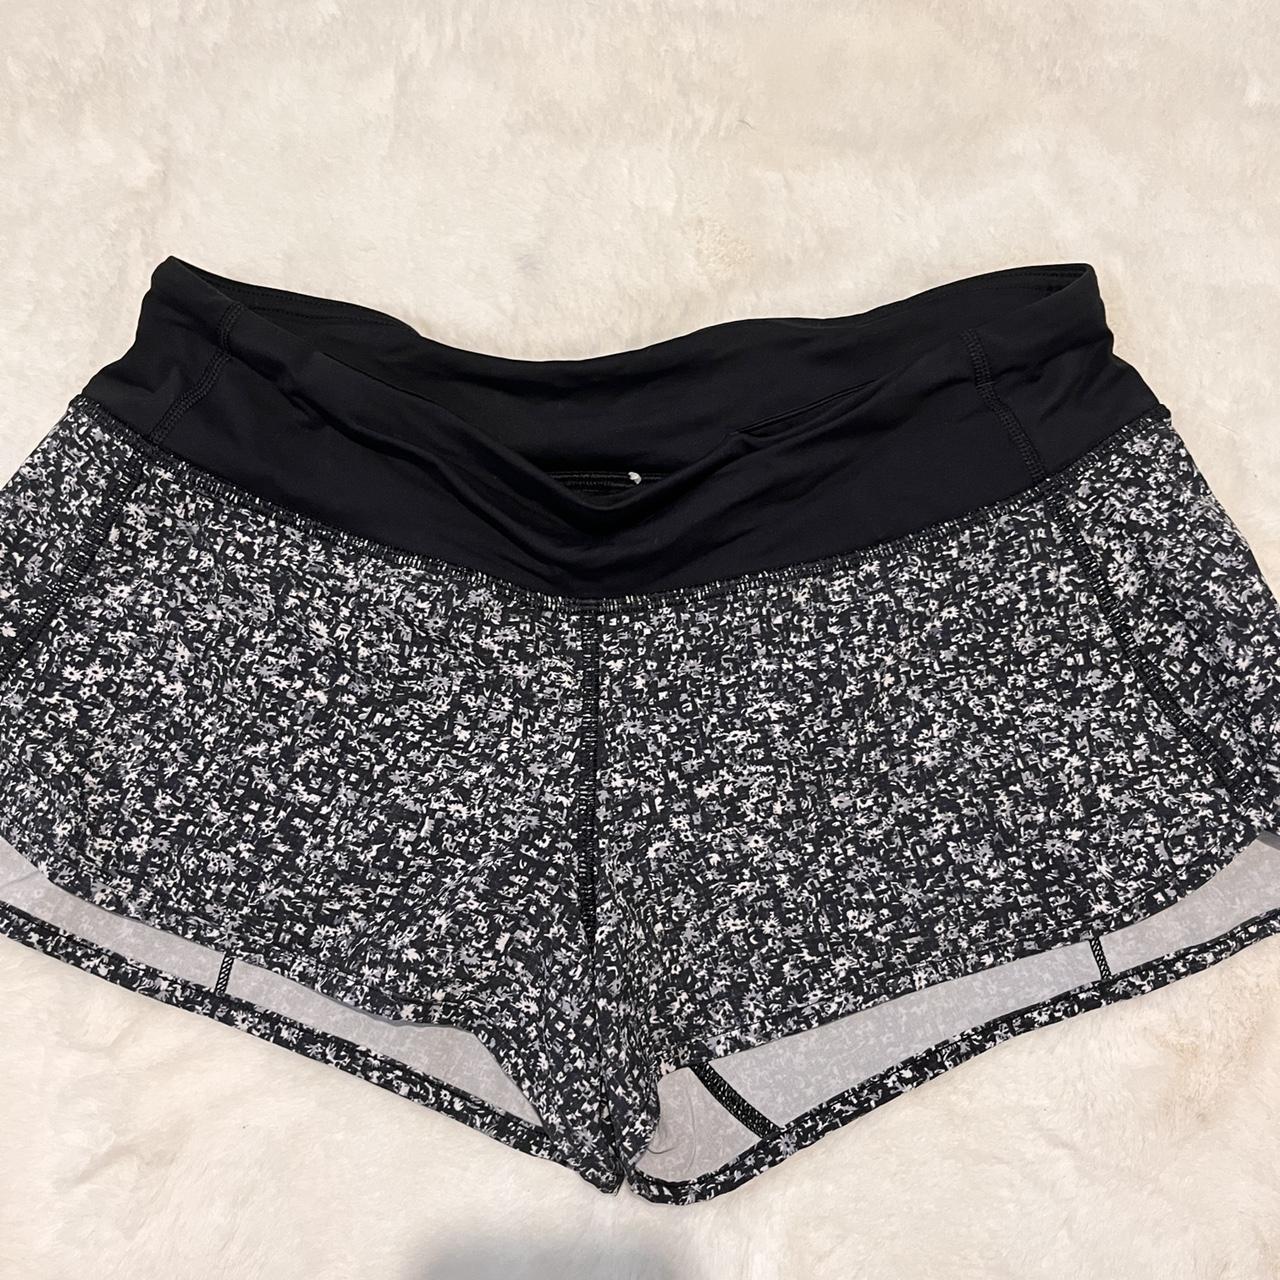 lululemon 2.5 inseam low-rise hotty hot shorts with - Depop